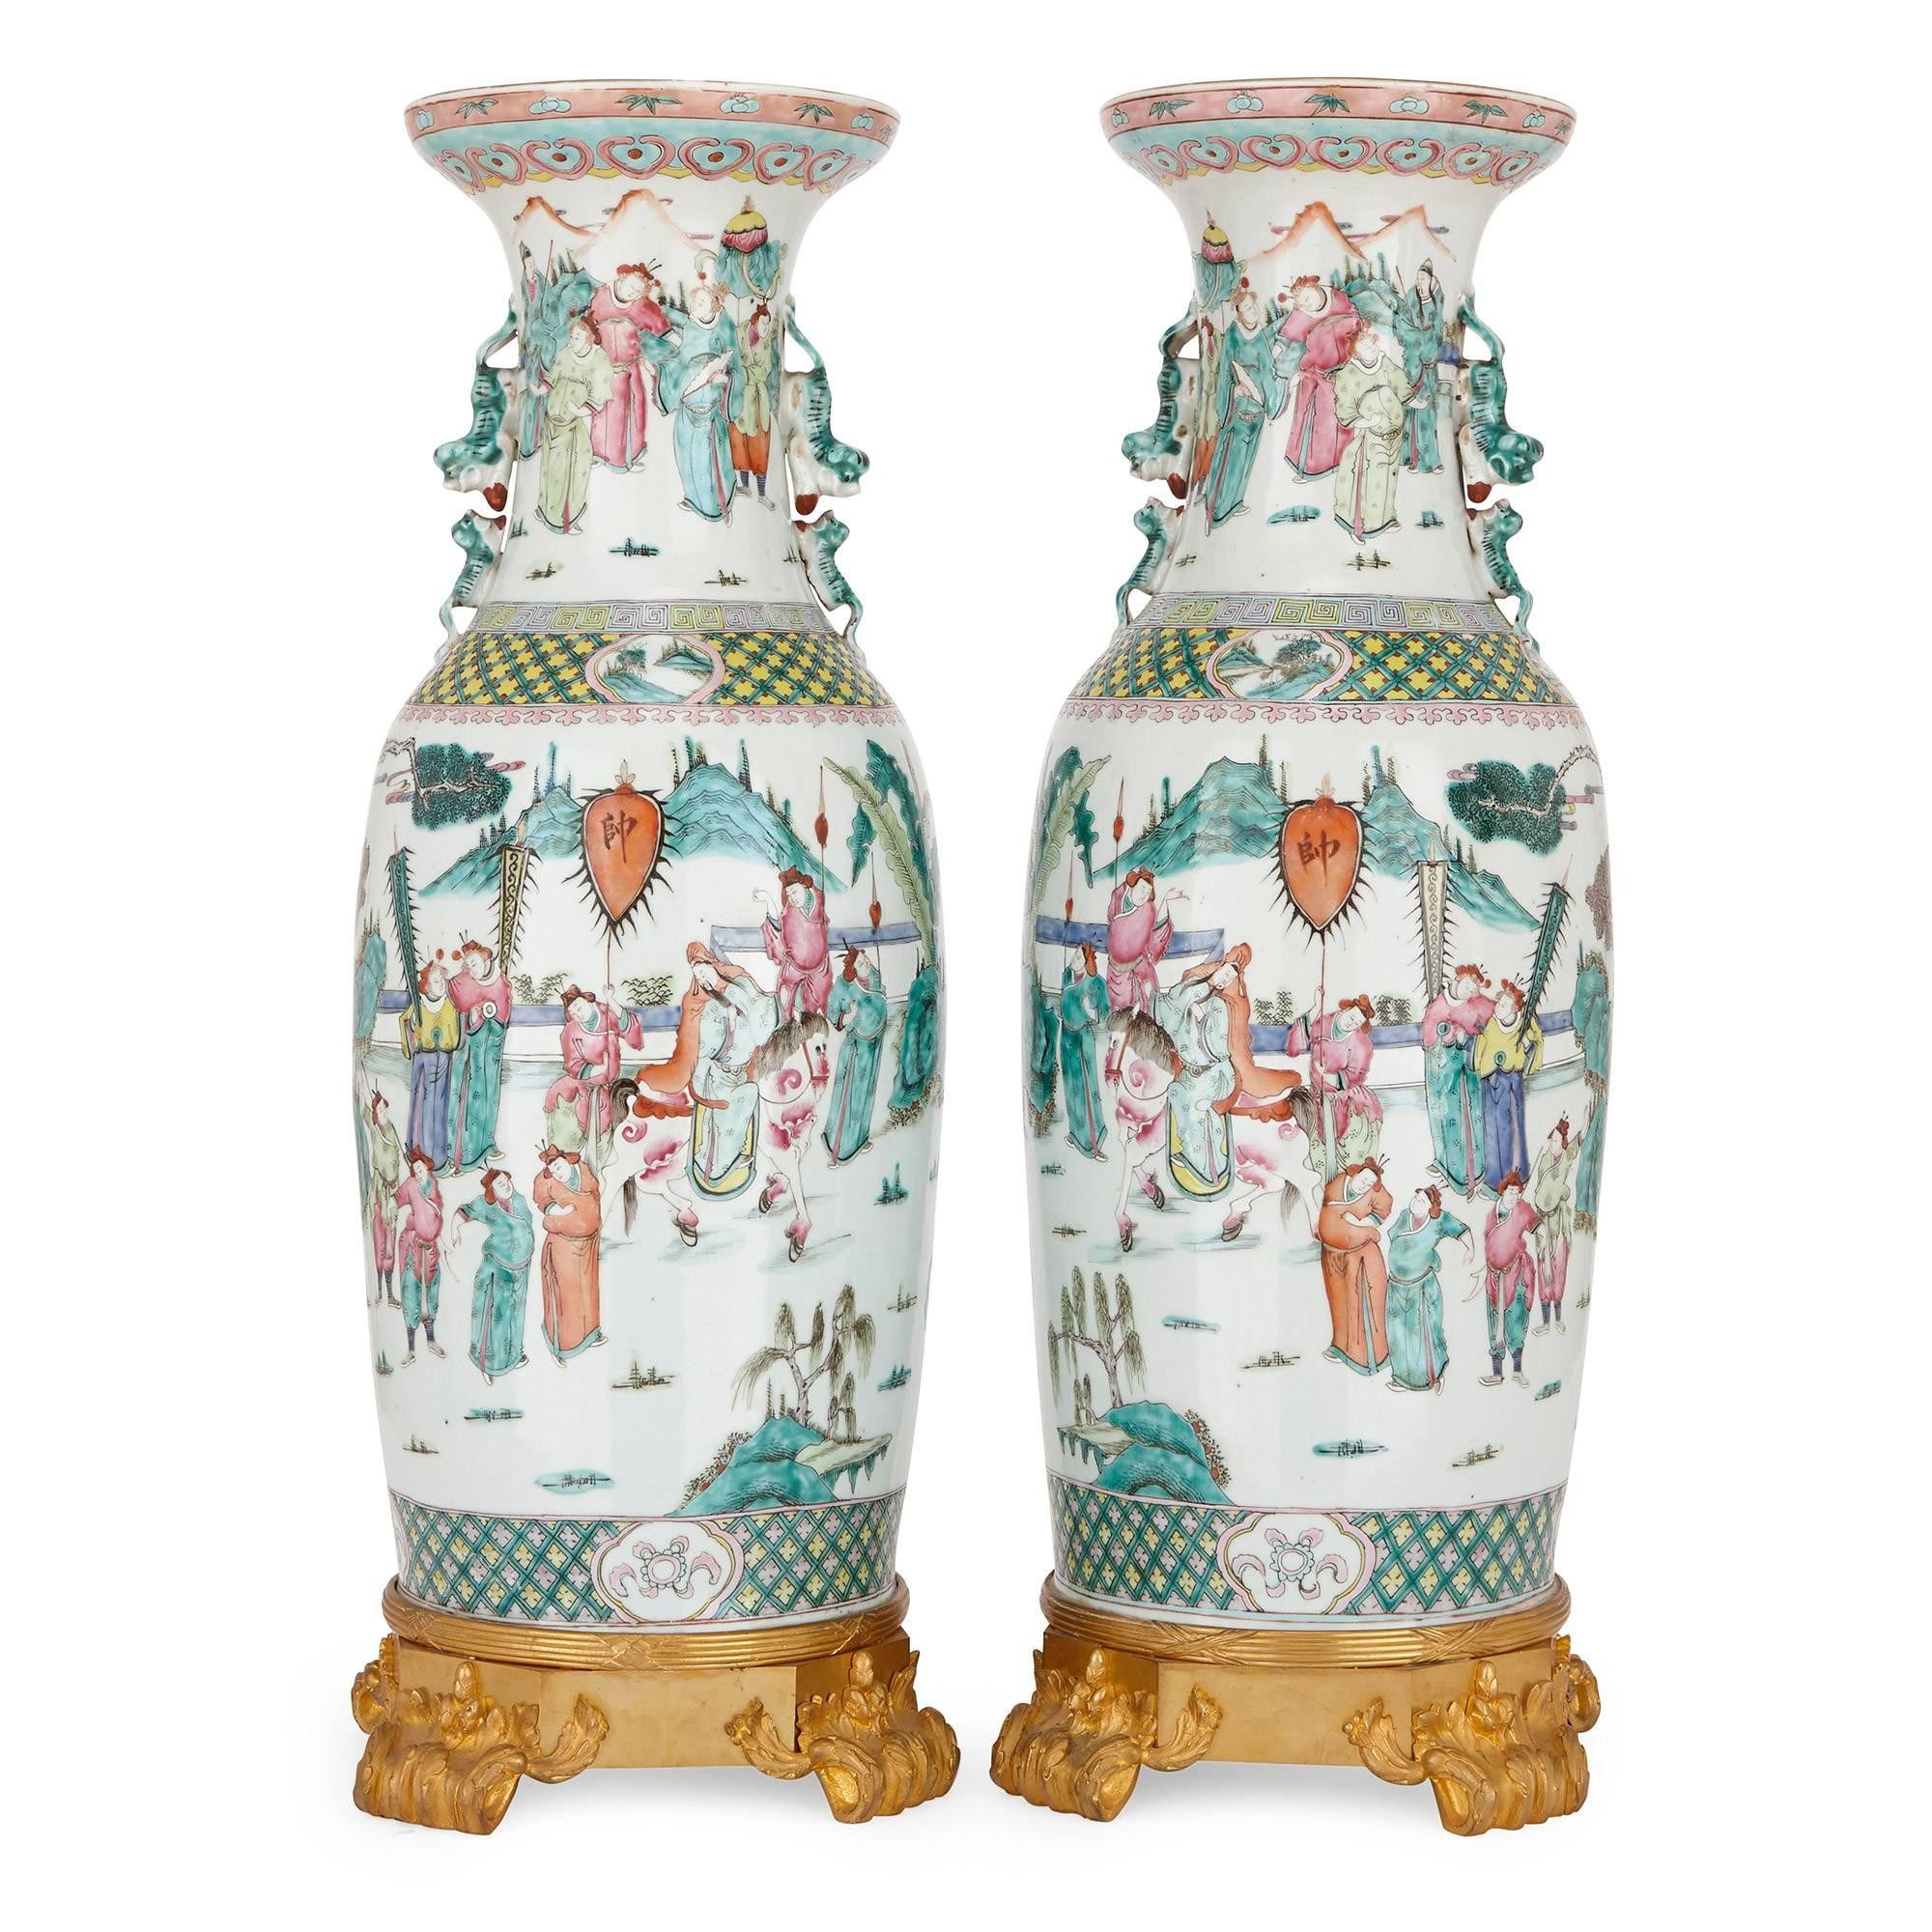 16 Fashionable Antique French Porcelain Vases 2024 free download antique french porcelain vases of pair of chinese antique canton famille rose porcelain vases for sale within pair of chinese antique canton famille rose porcelain vases for sale at 1stdibs